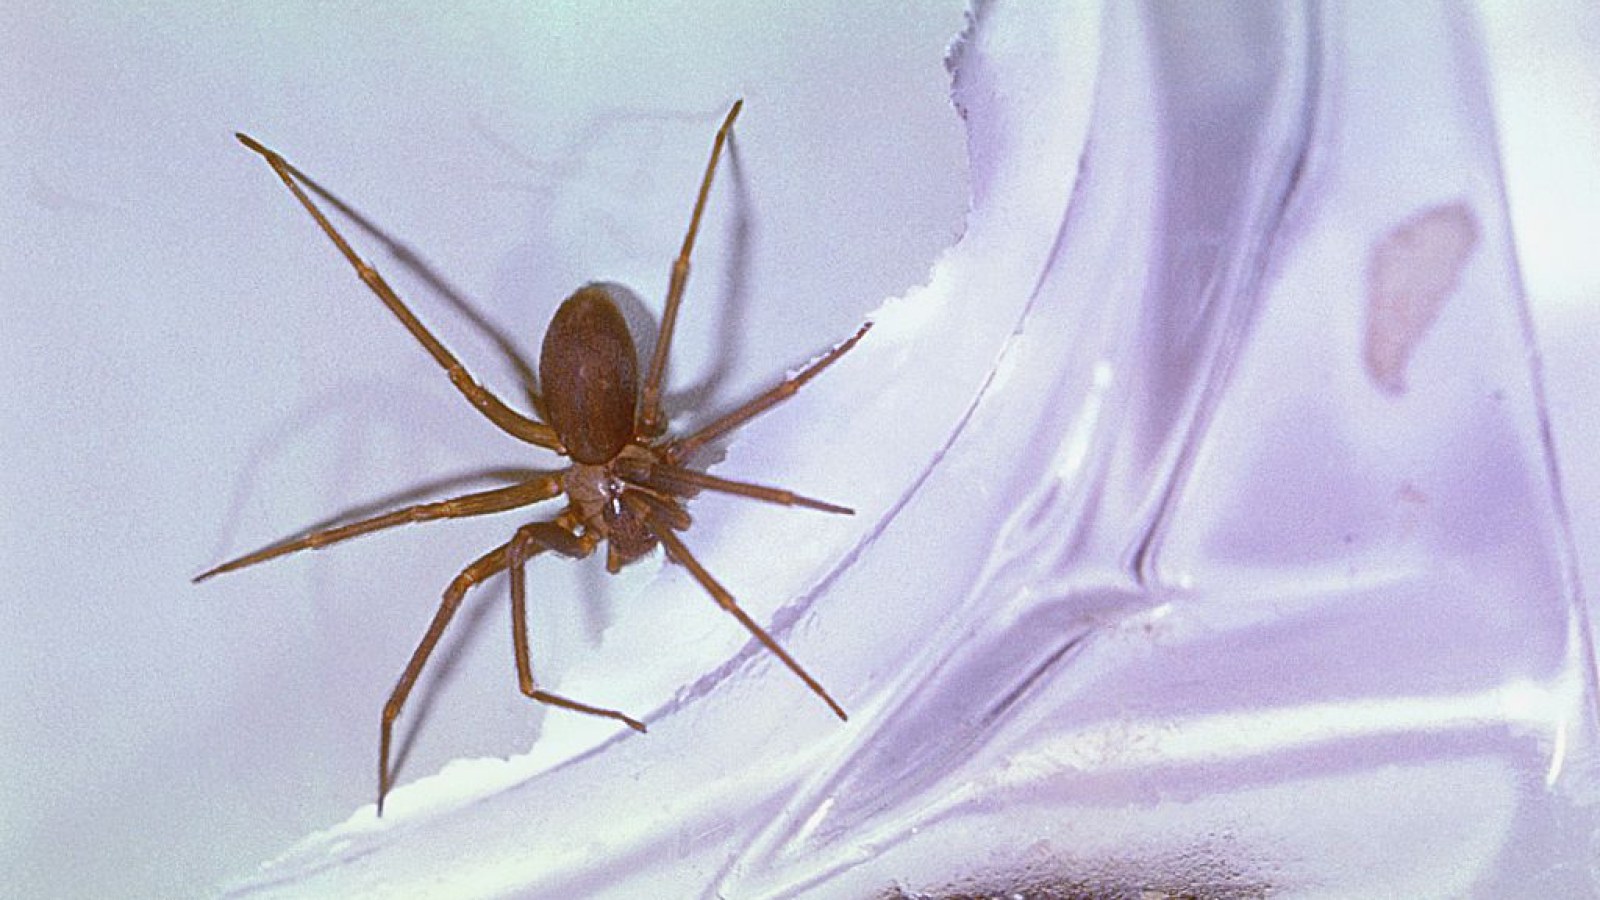 Brown Recluse Spider Bites Man In His Sleep Causing Him To Almost Lose An Arm